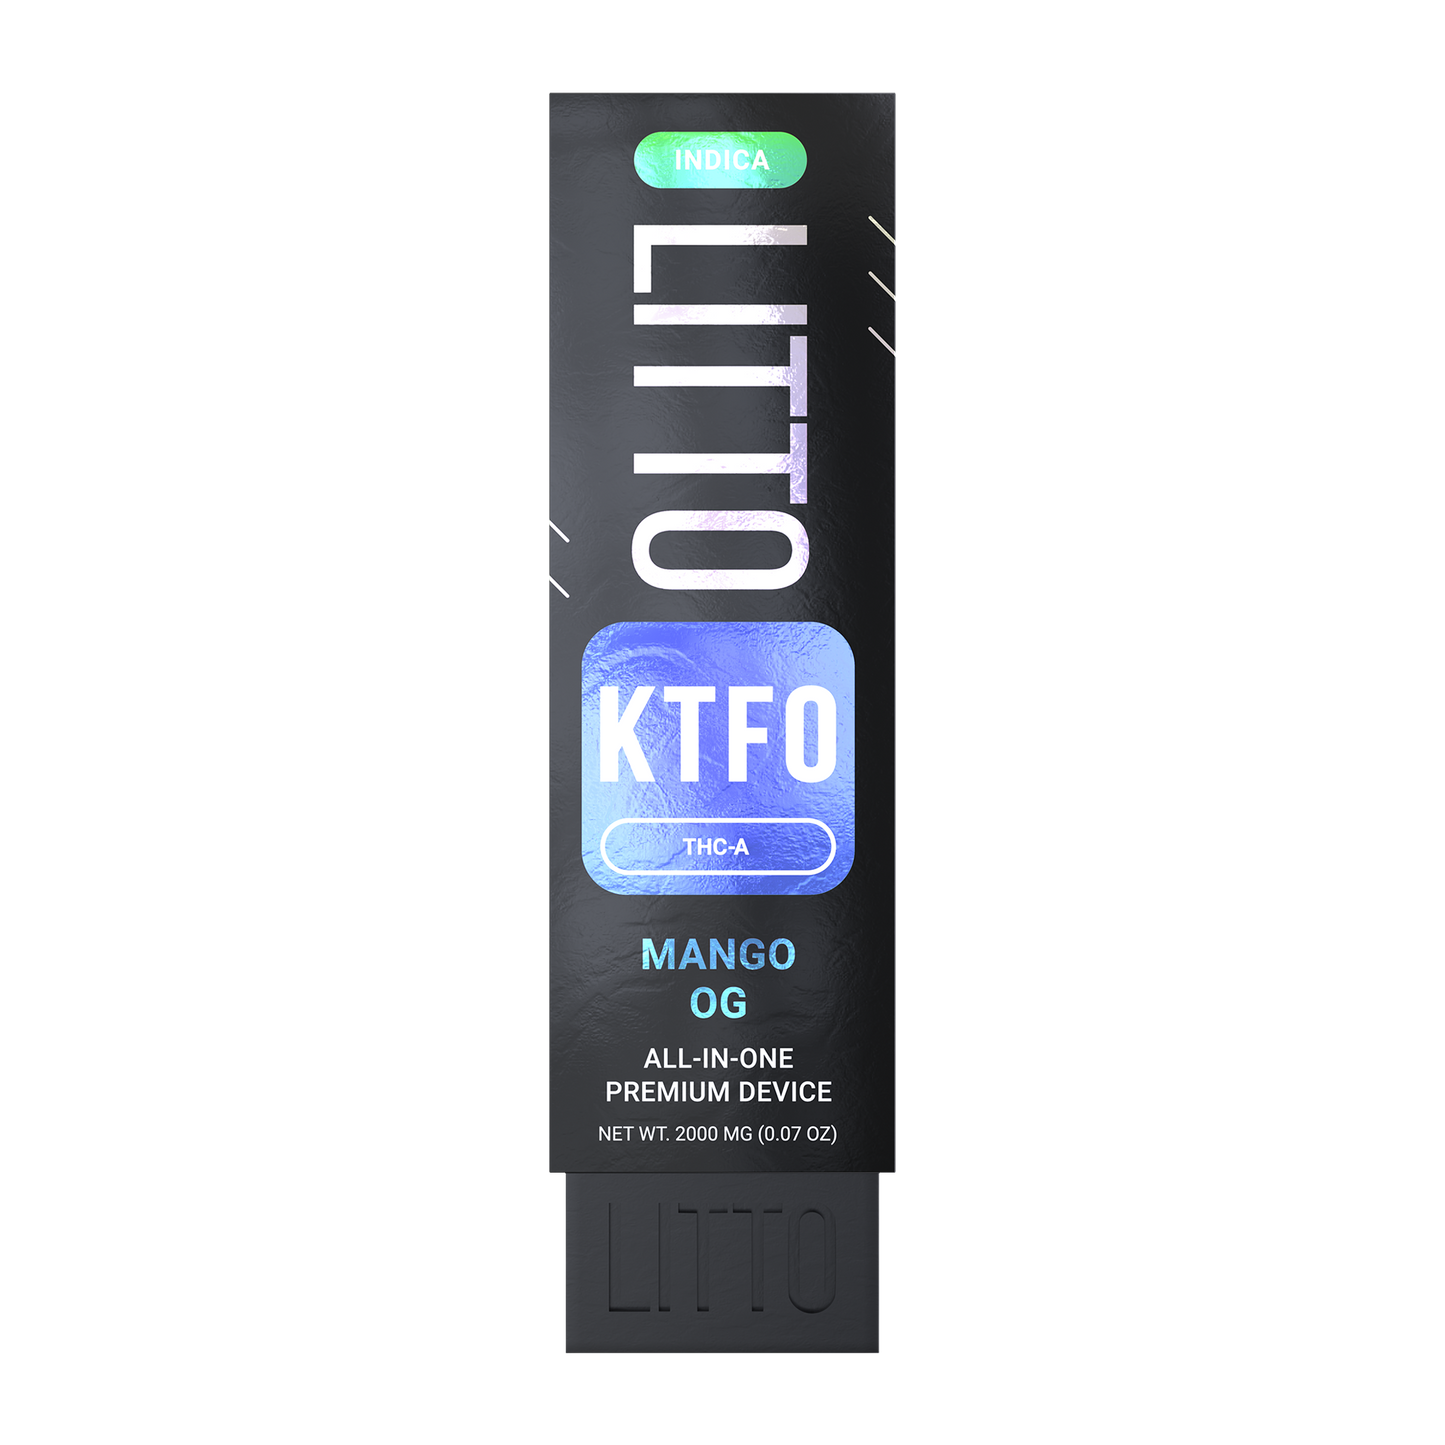 All-in-One Device - KTFO - Indica - THCA - Mango OG - 2G